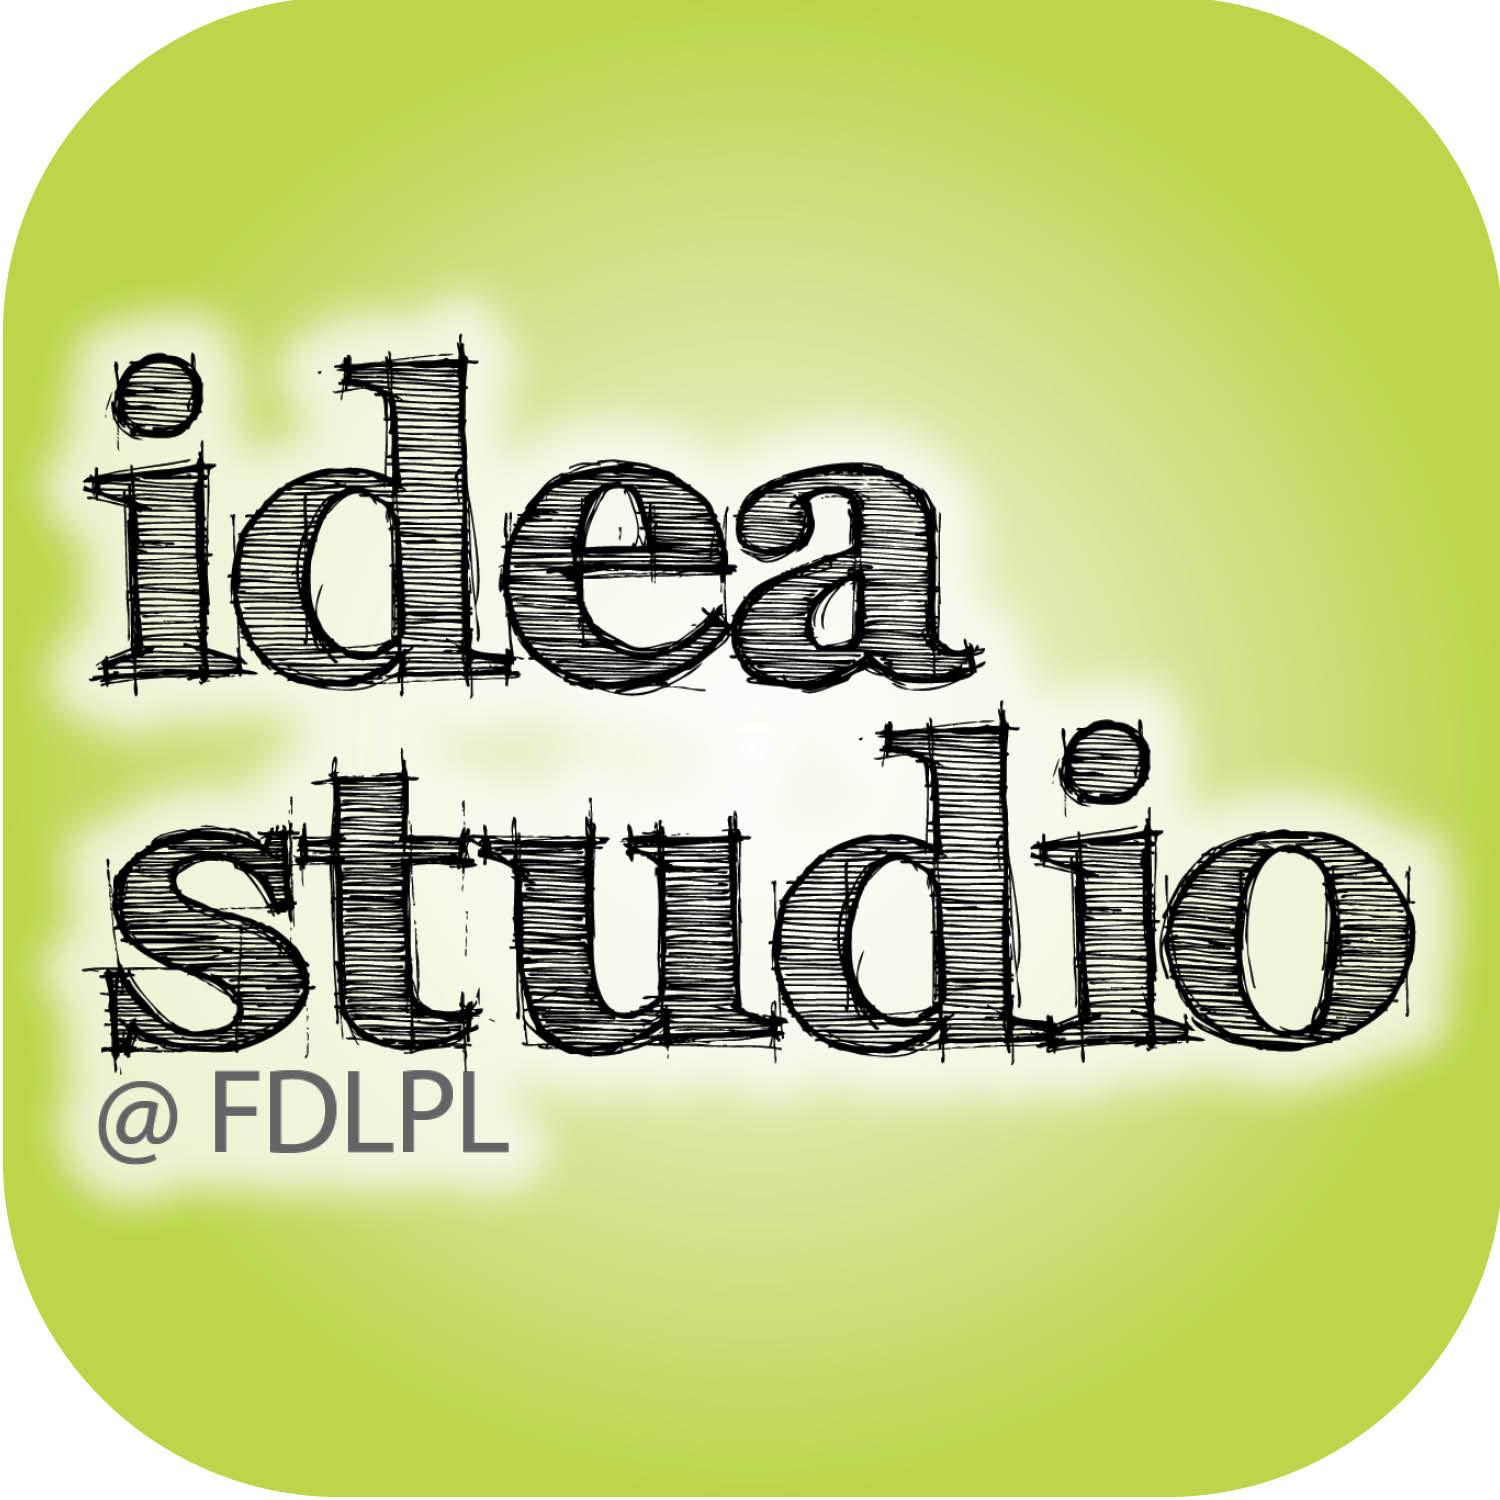 Get creative this February in the Idea Studio at the FDL Public Library